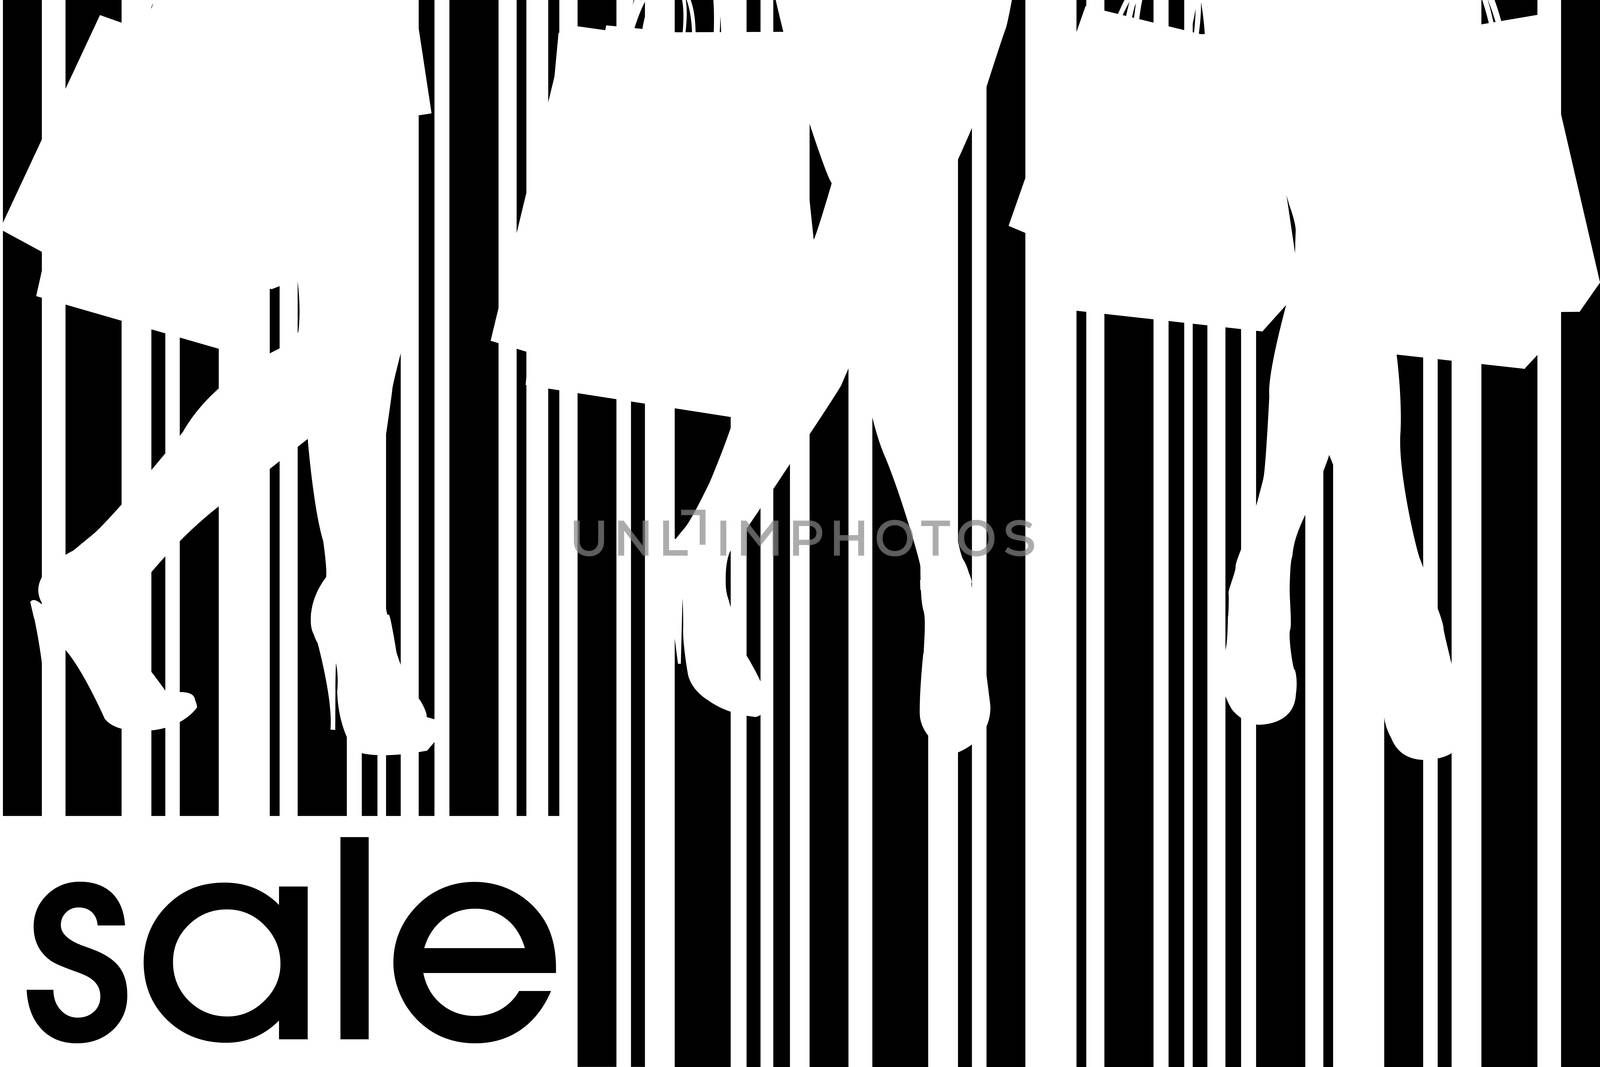 Women with shopping bags against a bar code background